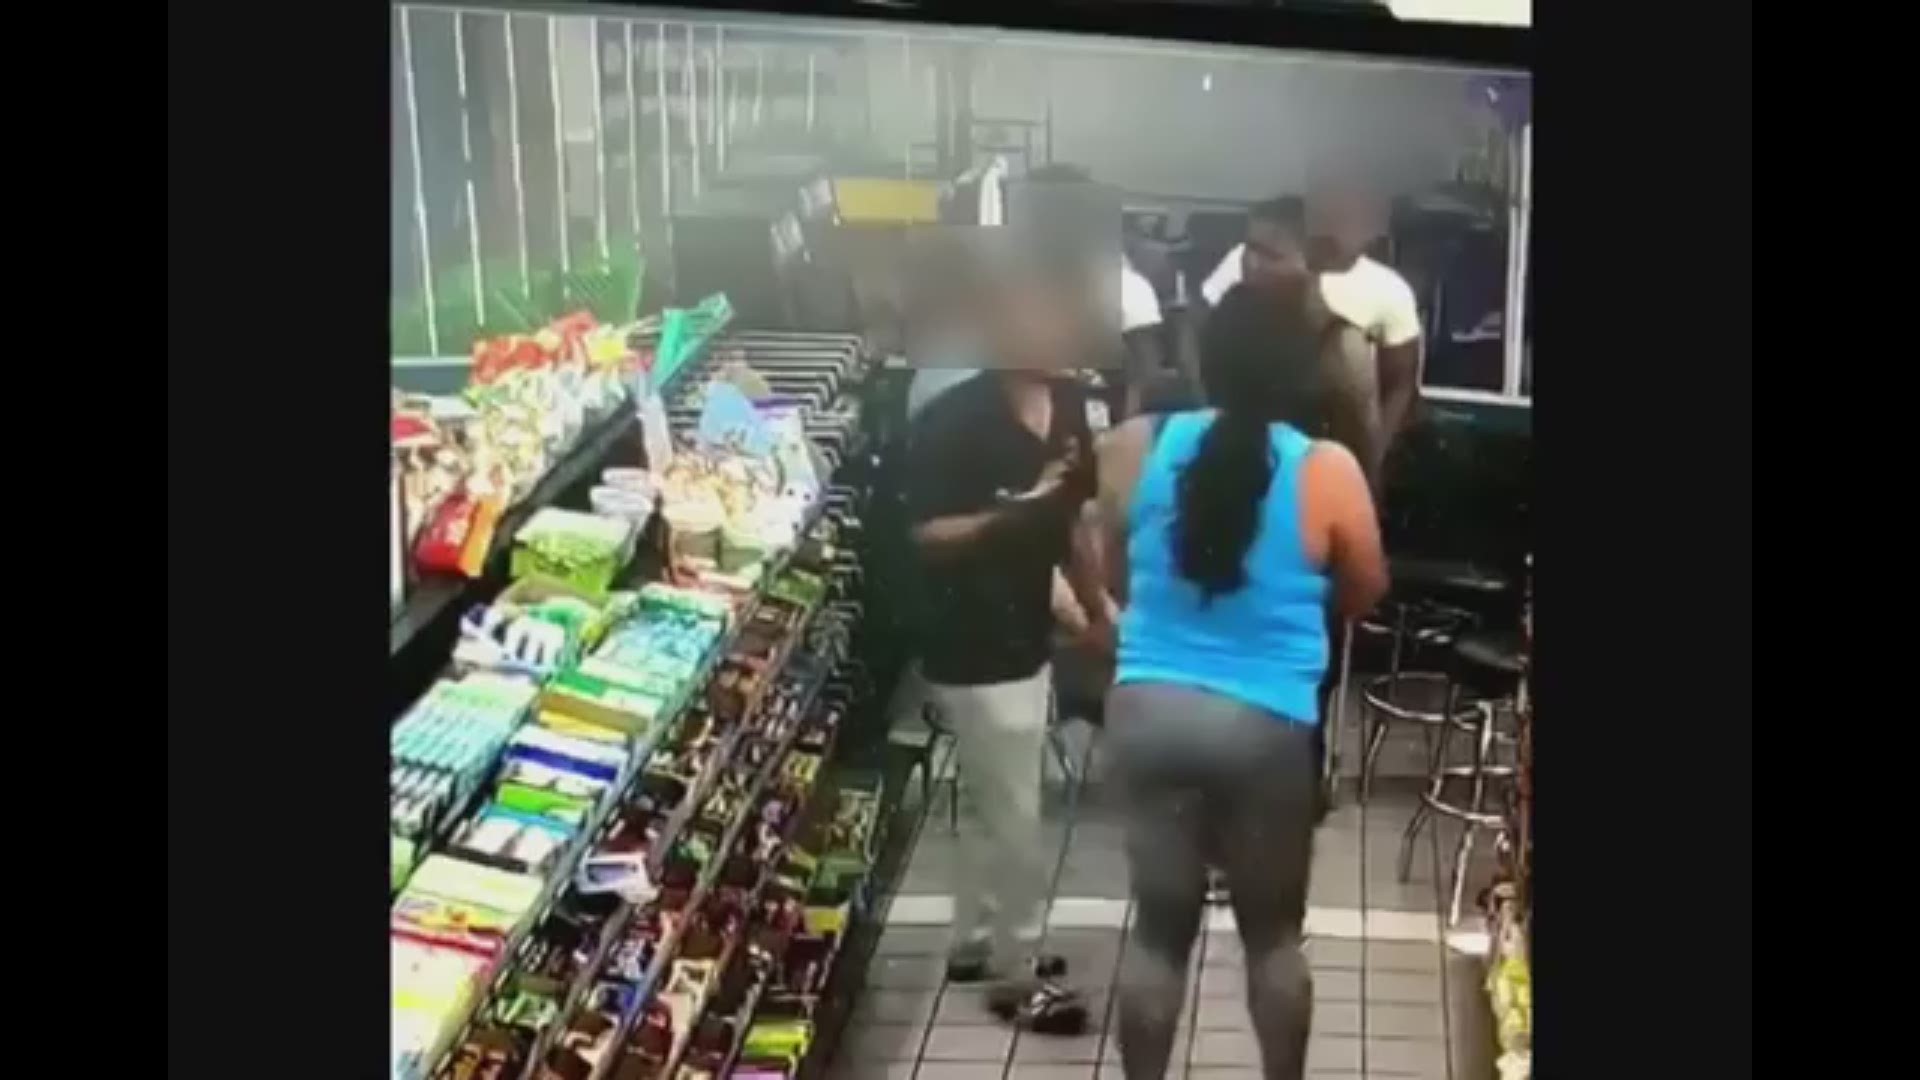 Police are asking for the public’s help in identifying the suspects responsible for a violent attack in a convenience store northeast Houston.